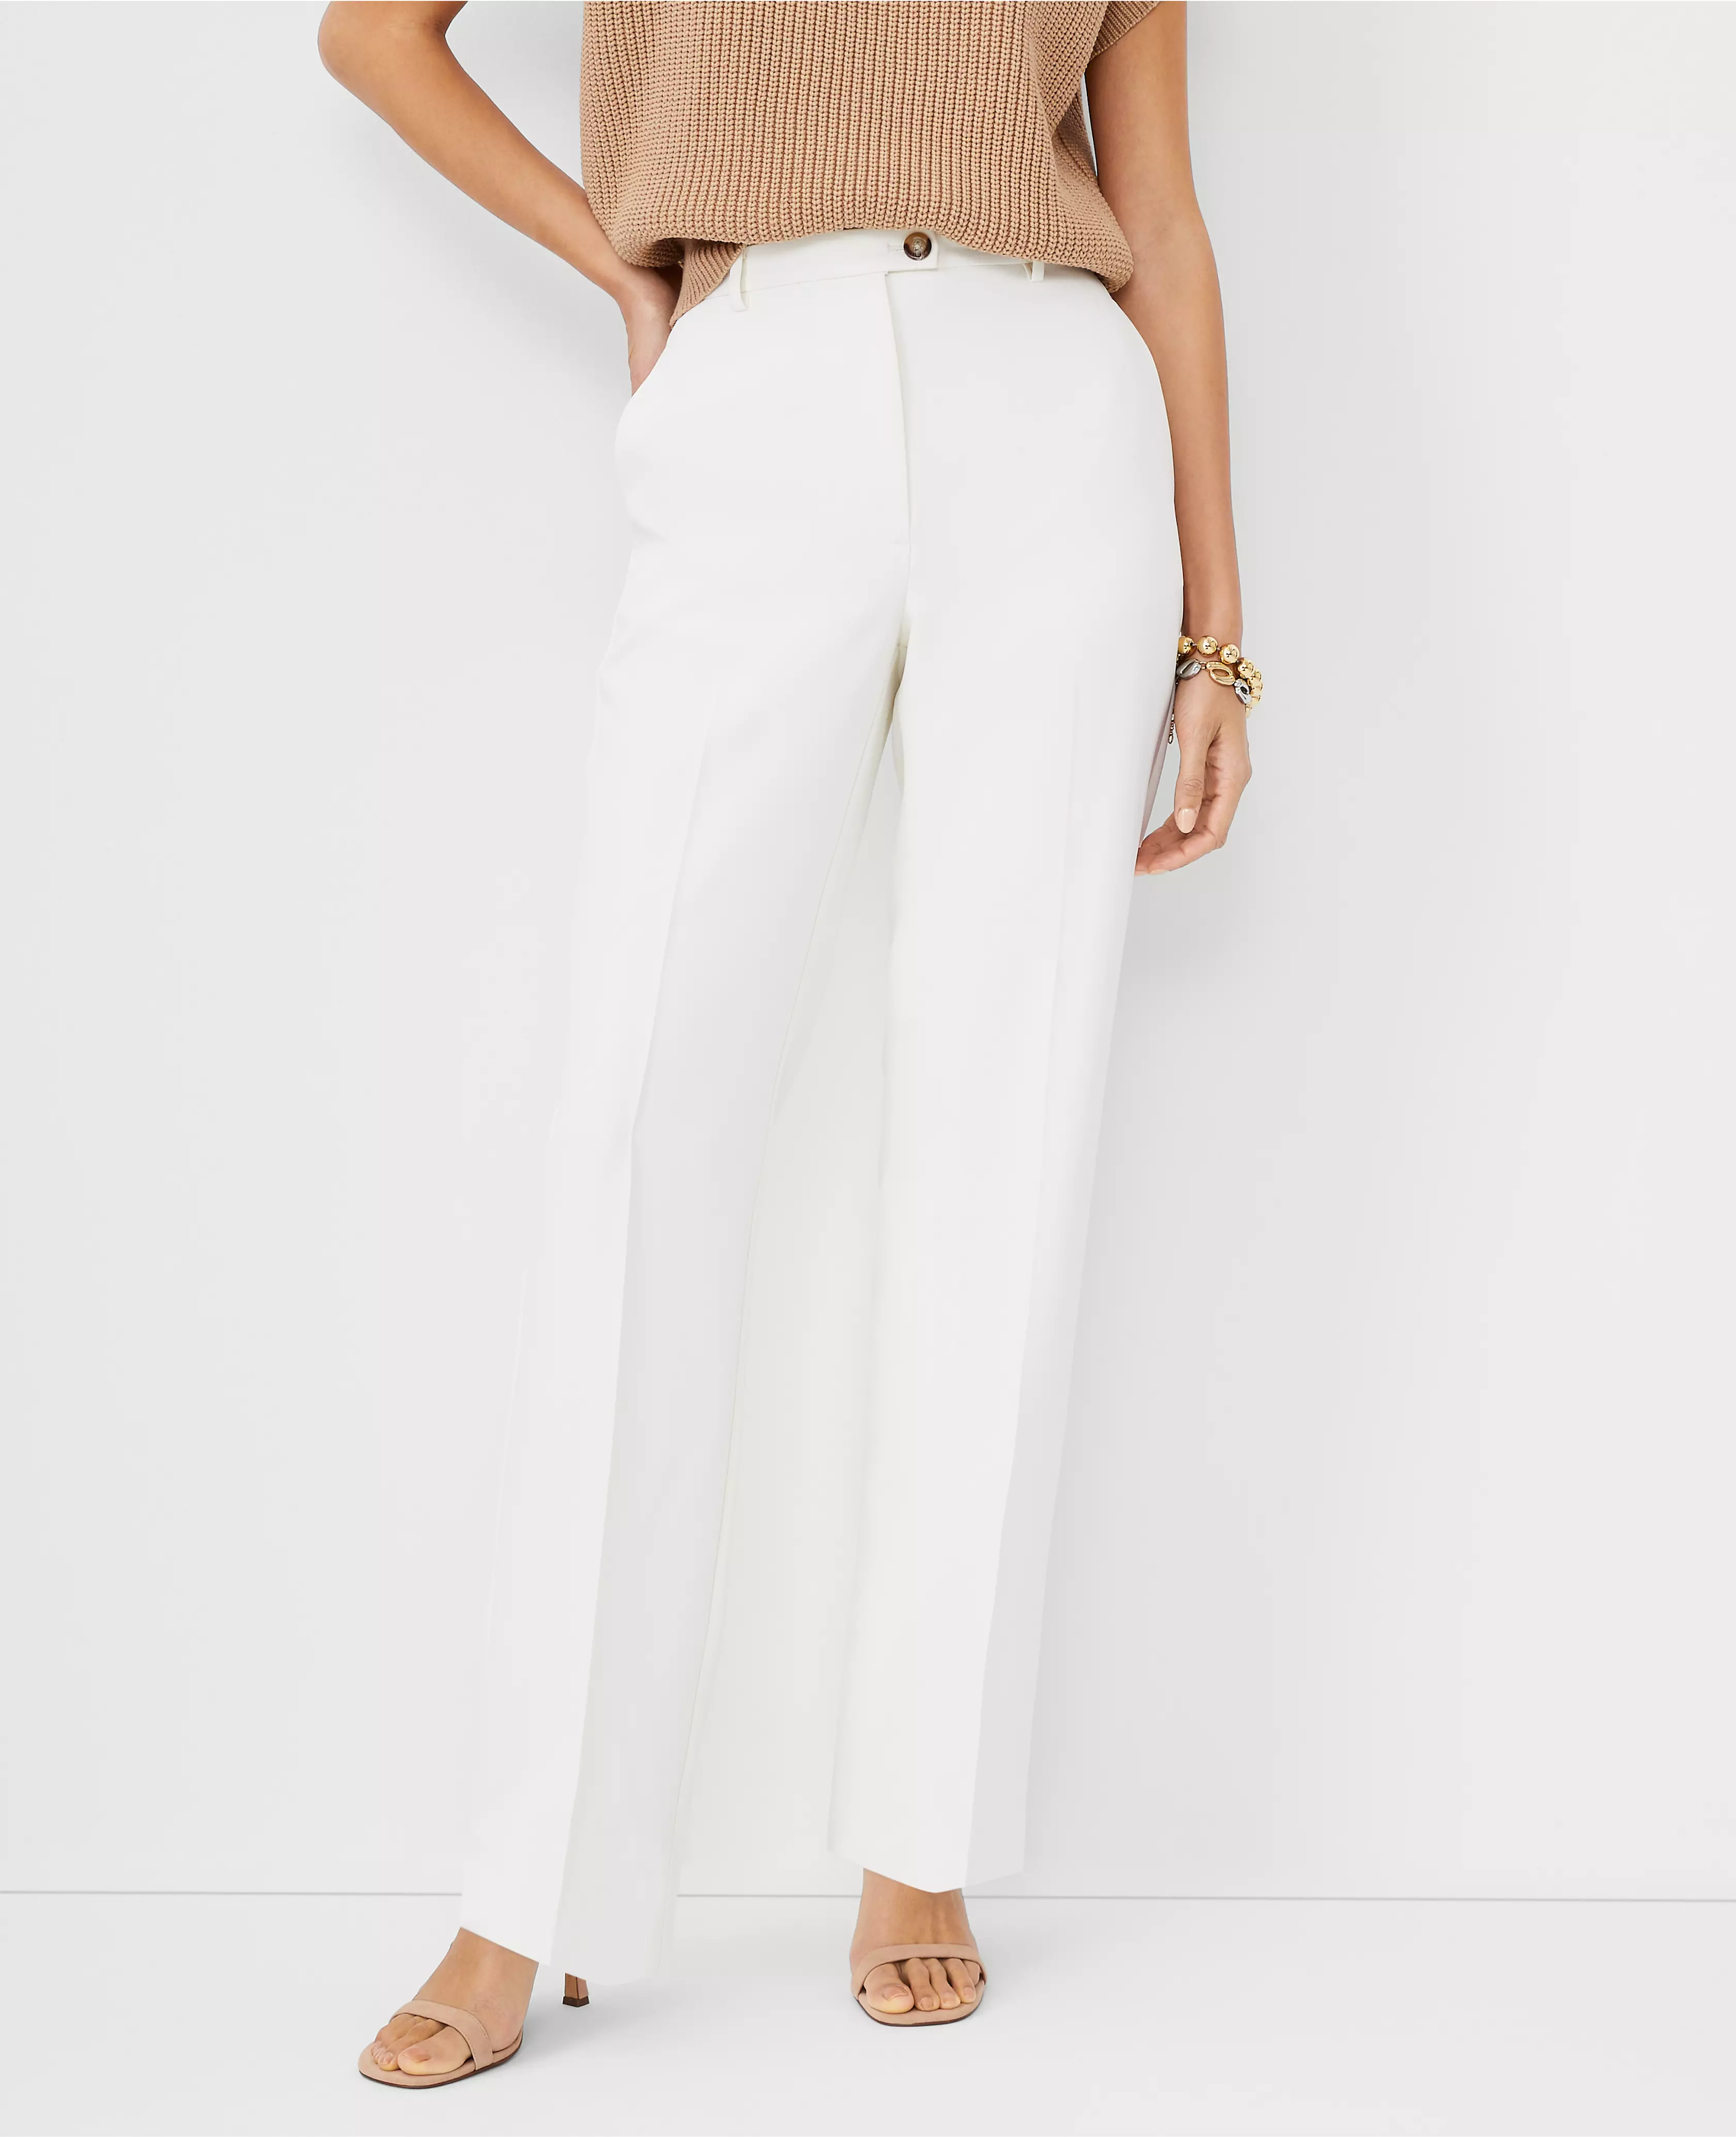 The Slim Straight Pant in Fluid Crepe